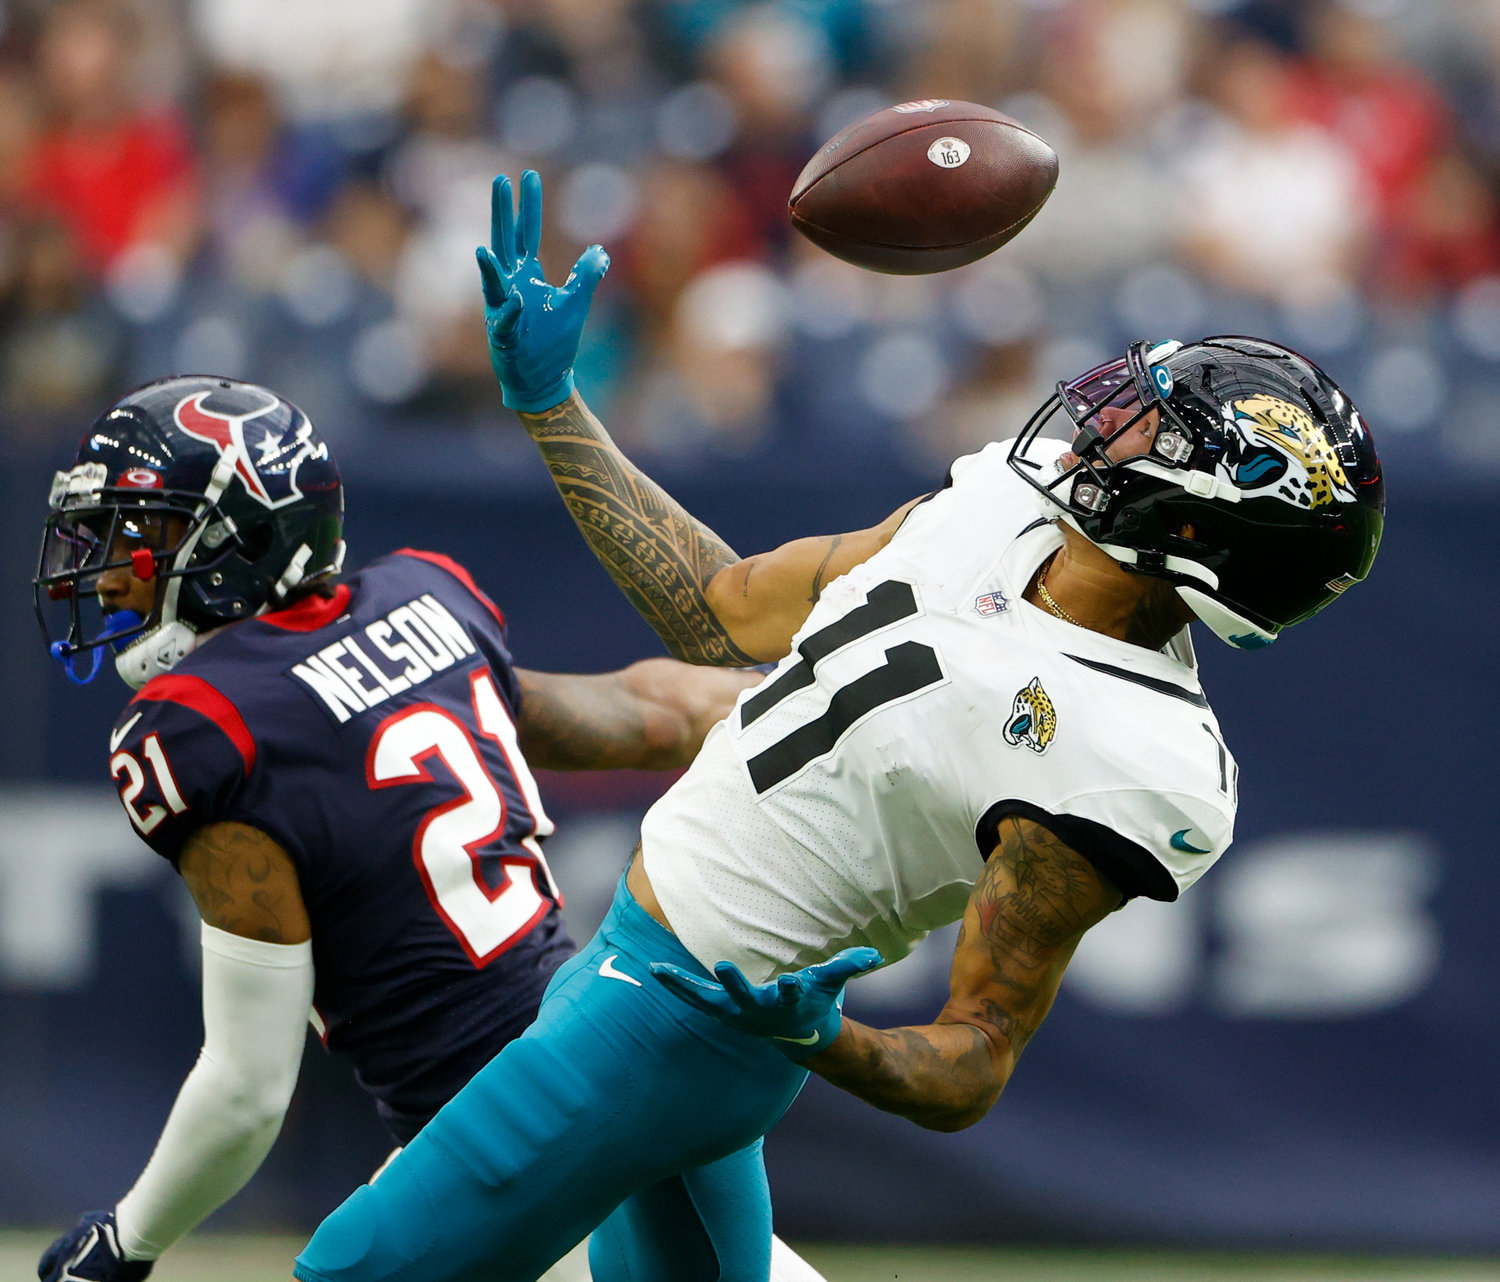 Jaguars wide receiver Marvin Jones Jr. (11) catches a pass he tipped into the air during an NFL game between the Houston Texans and the Jacksonville Jaguars on Jan. 1, 2023 in Houston. The Jaguars won, 31-3.